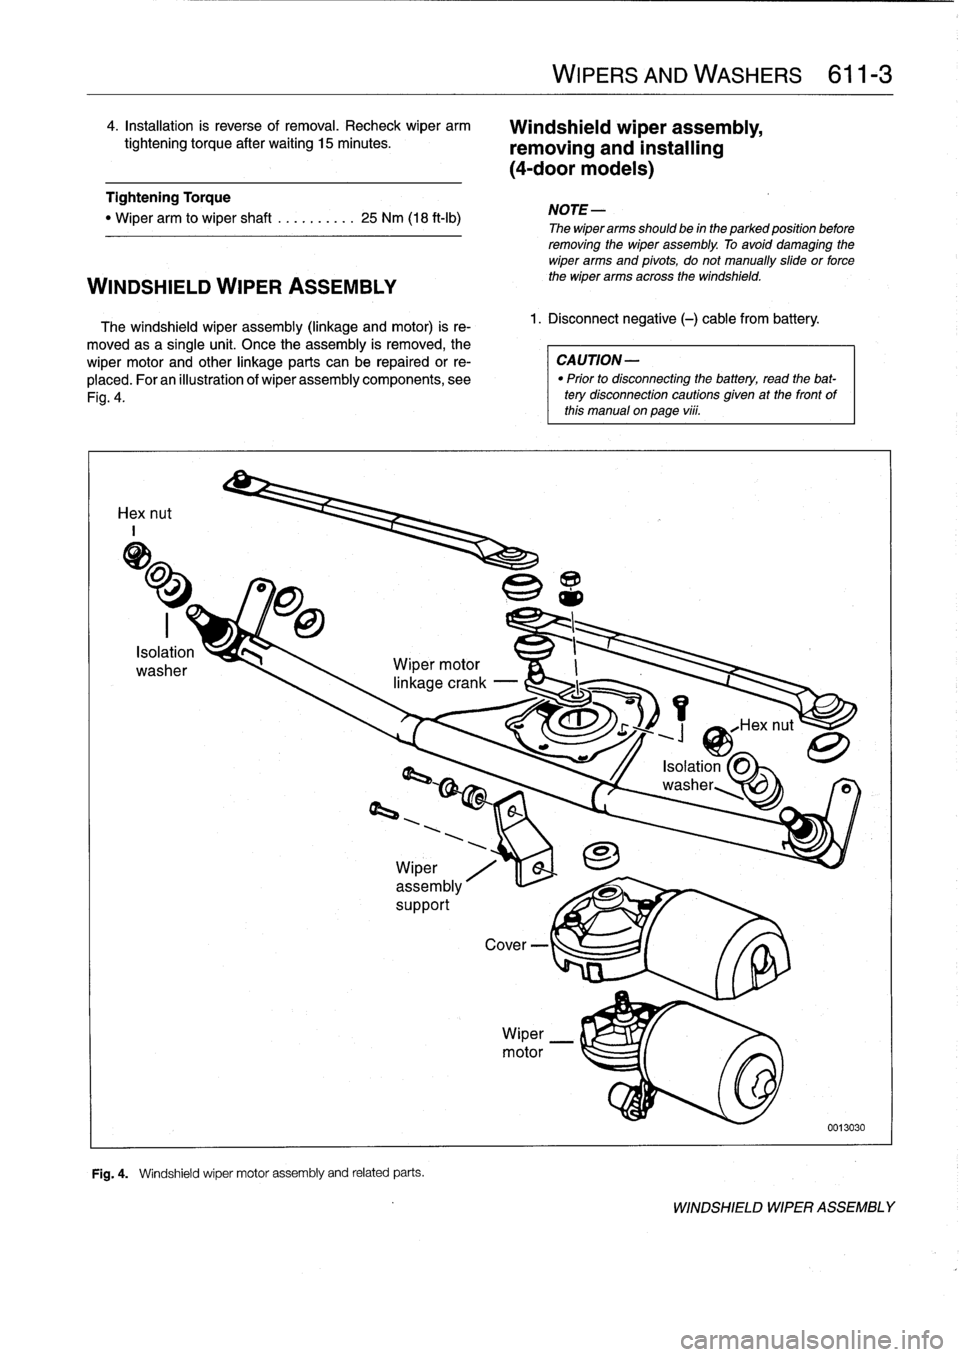 BMW 323i 1995 E36 Workshop Manual 
4
.
Installation
is
reverse
of
removal
.
Recheck
wiper
arm

tightening
torque
after
waiting
15minutes
.

Tightening
Torque

"
Wiper
arm
to
wiper
shaft
..........
25
Nm
(18
ft-Ib)

WINDSHIELD
WIPER
AS